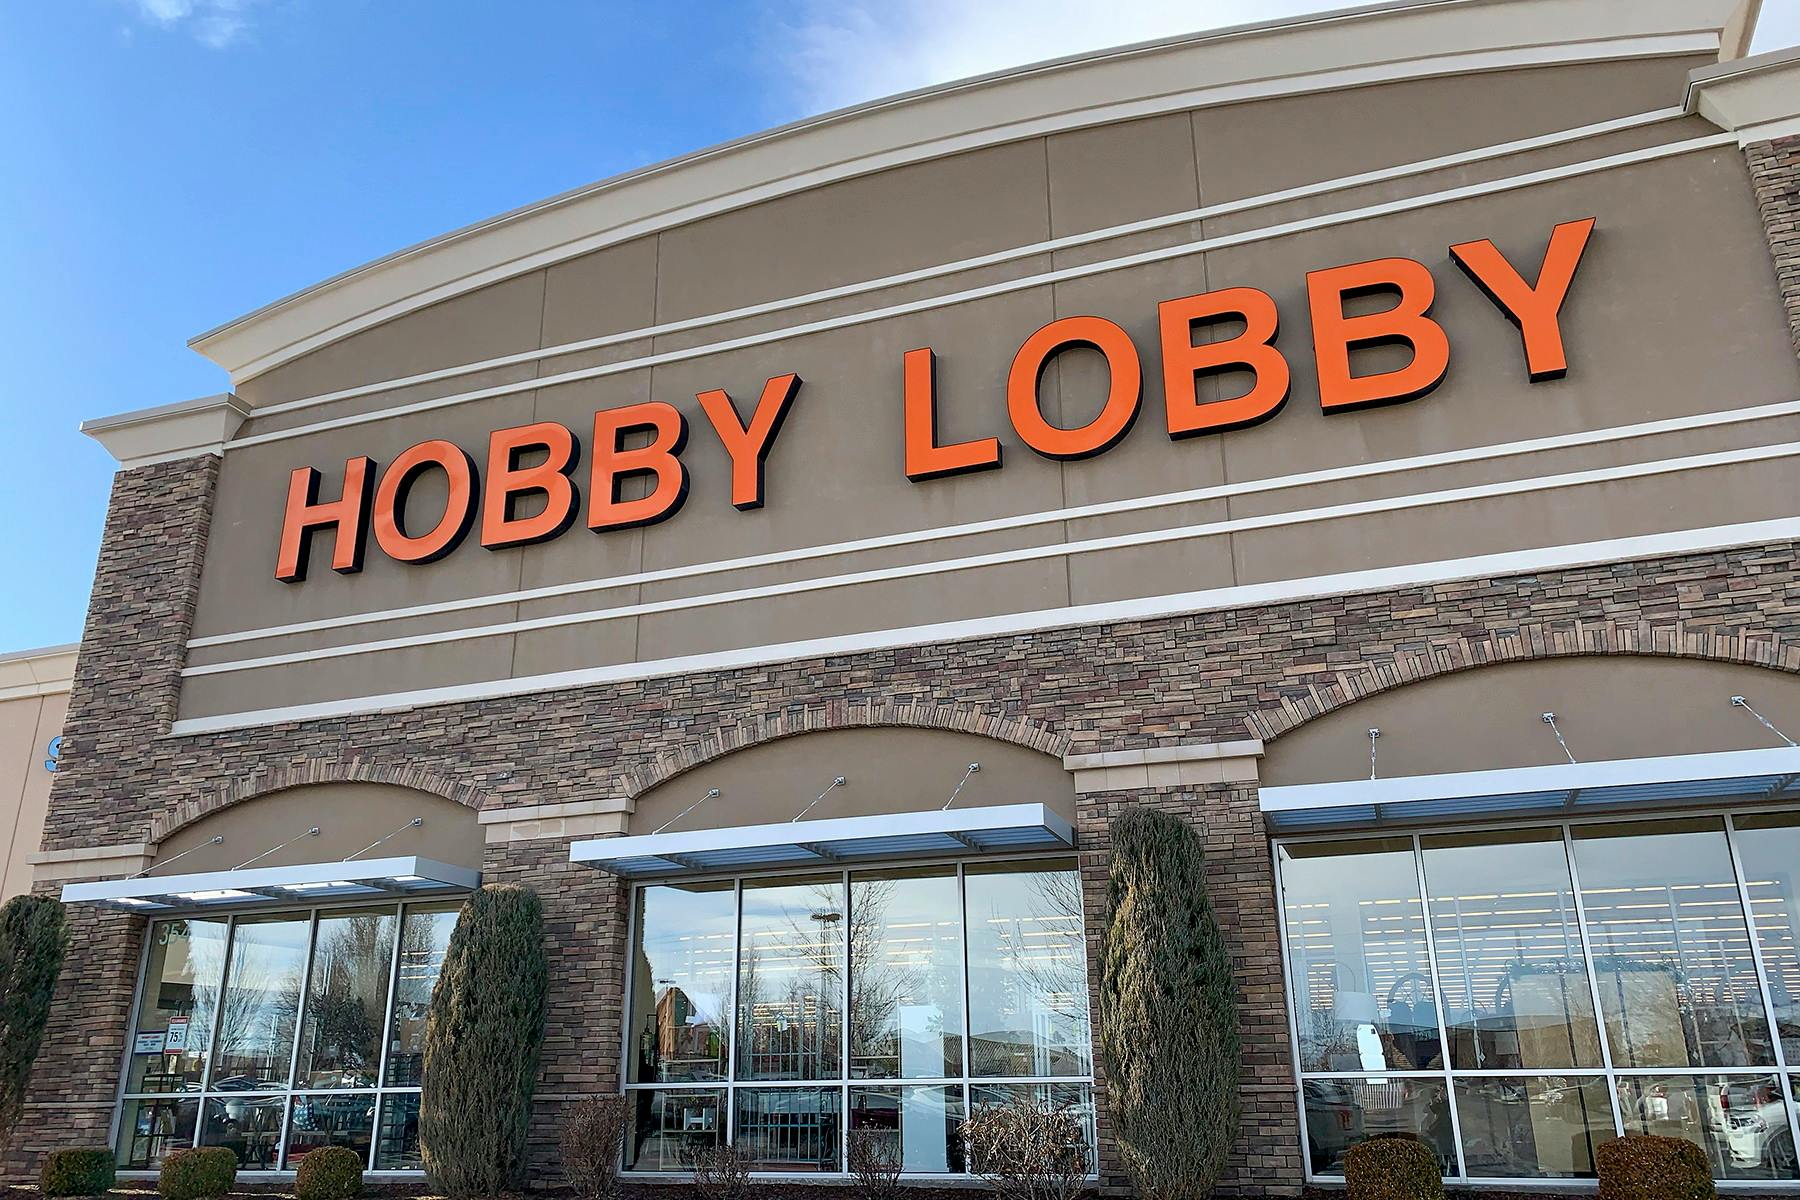 hobby lobby toys and games